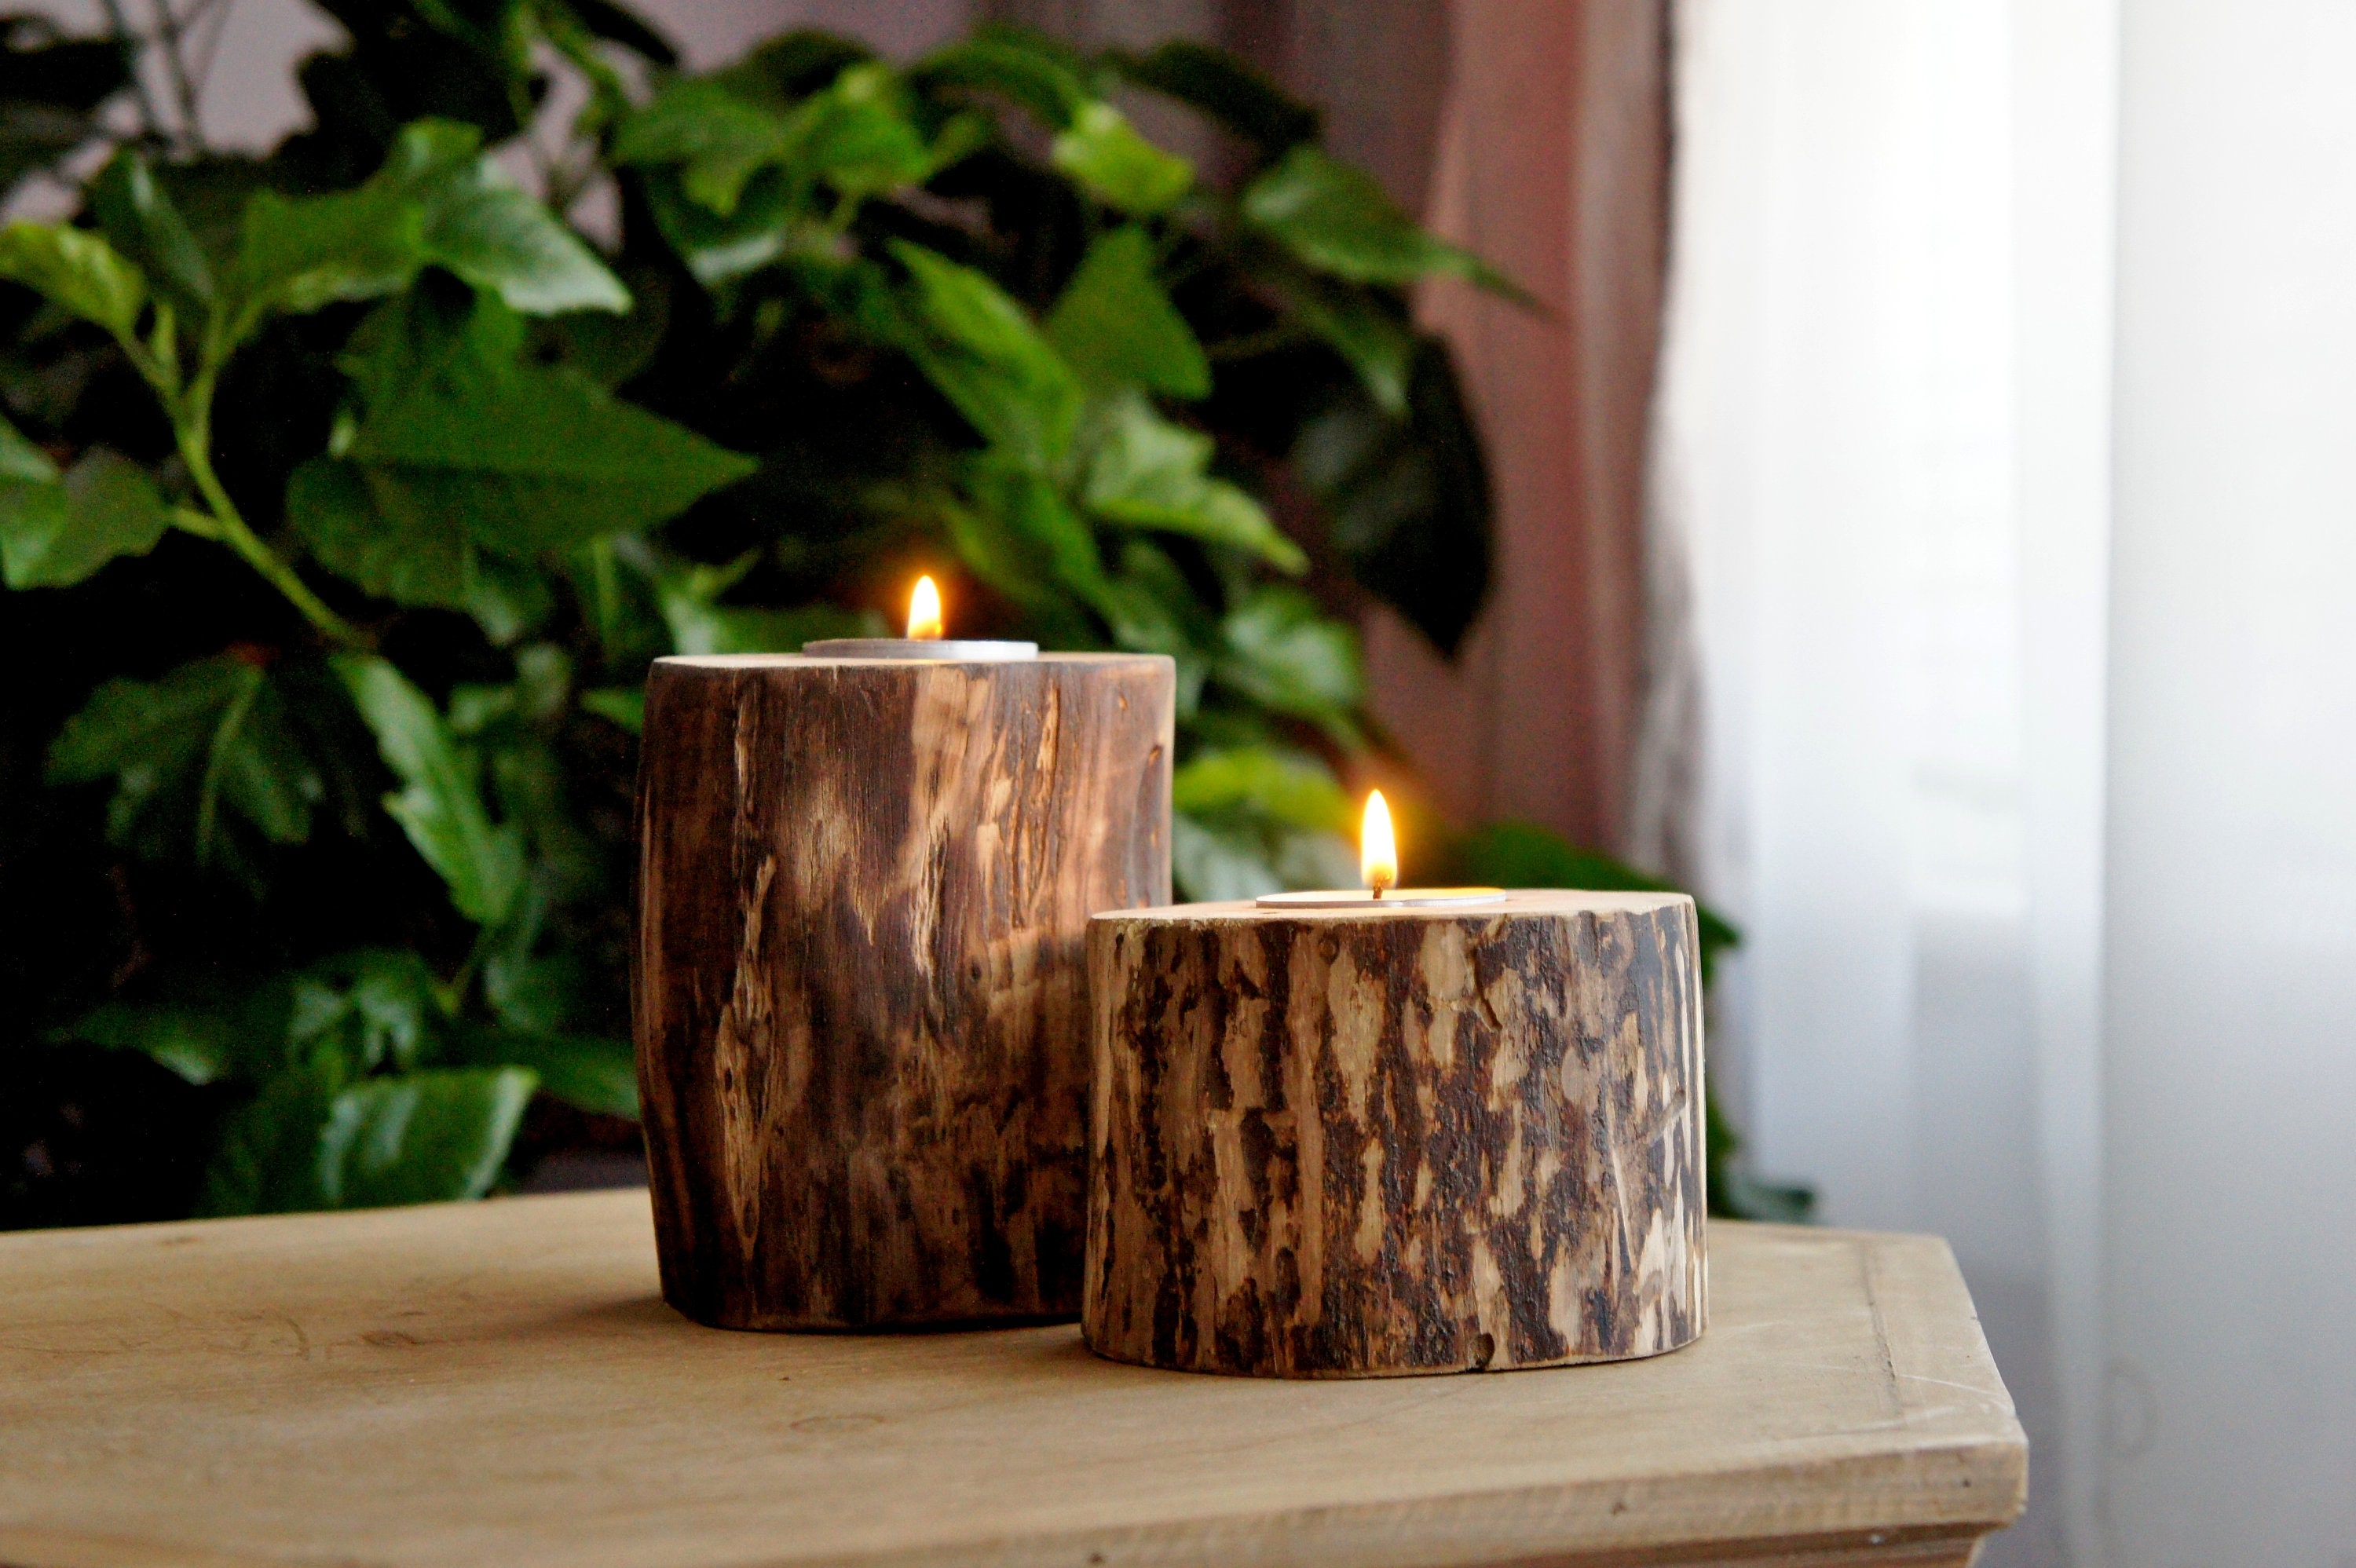 Log Candle Holder Rustic Wedding Woodsy Table Decor, Bridesmaids Gifts  Favors, Centerpiece Setting Display 